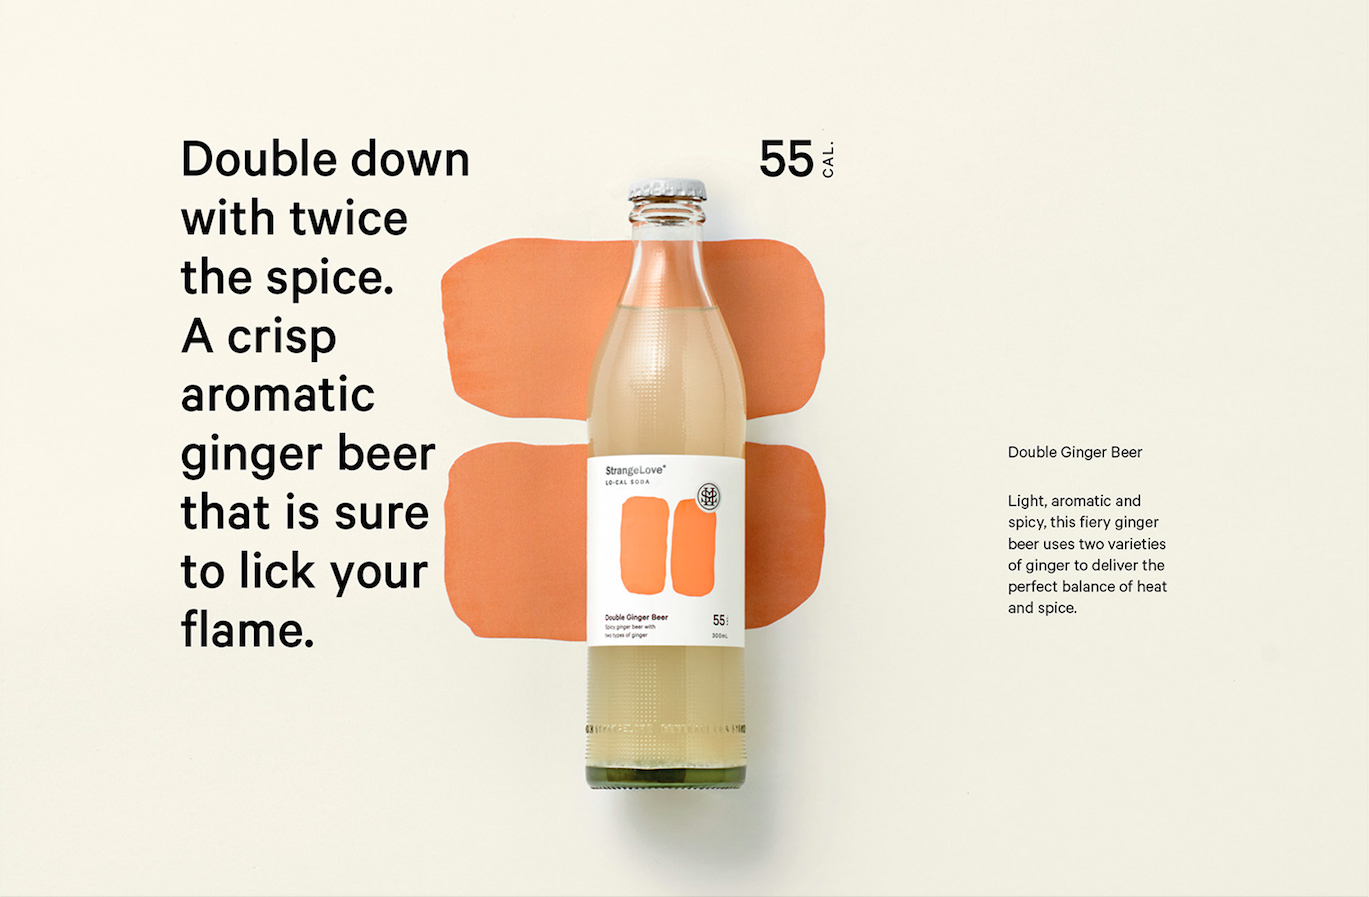 Graphic and structural design created by New Zealand studio Marx Design for soft drinks brand StrangeLove